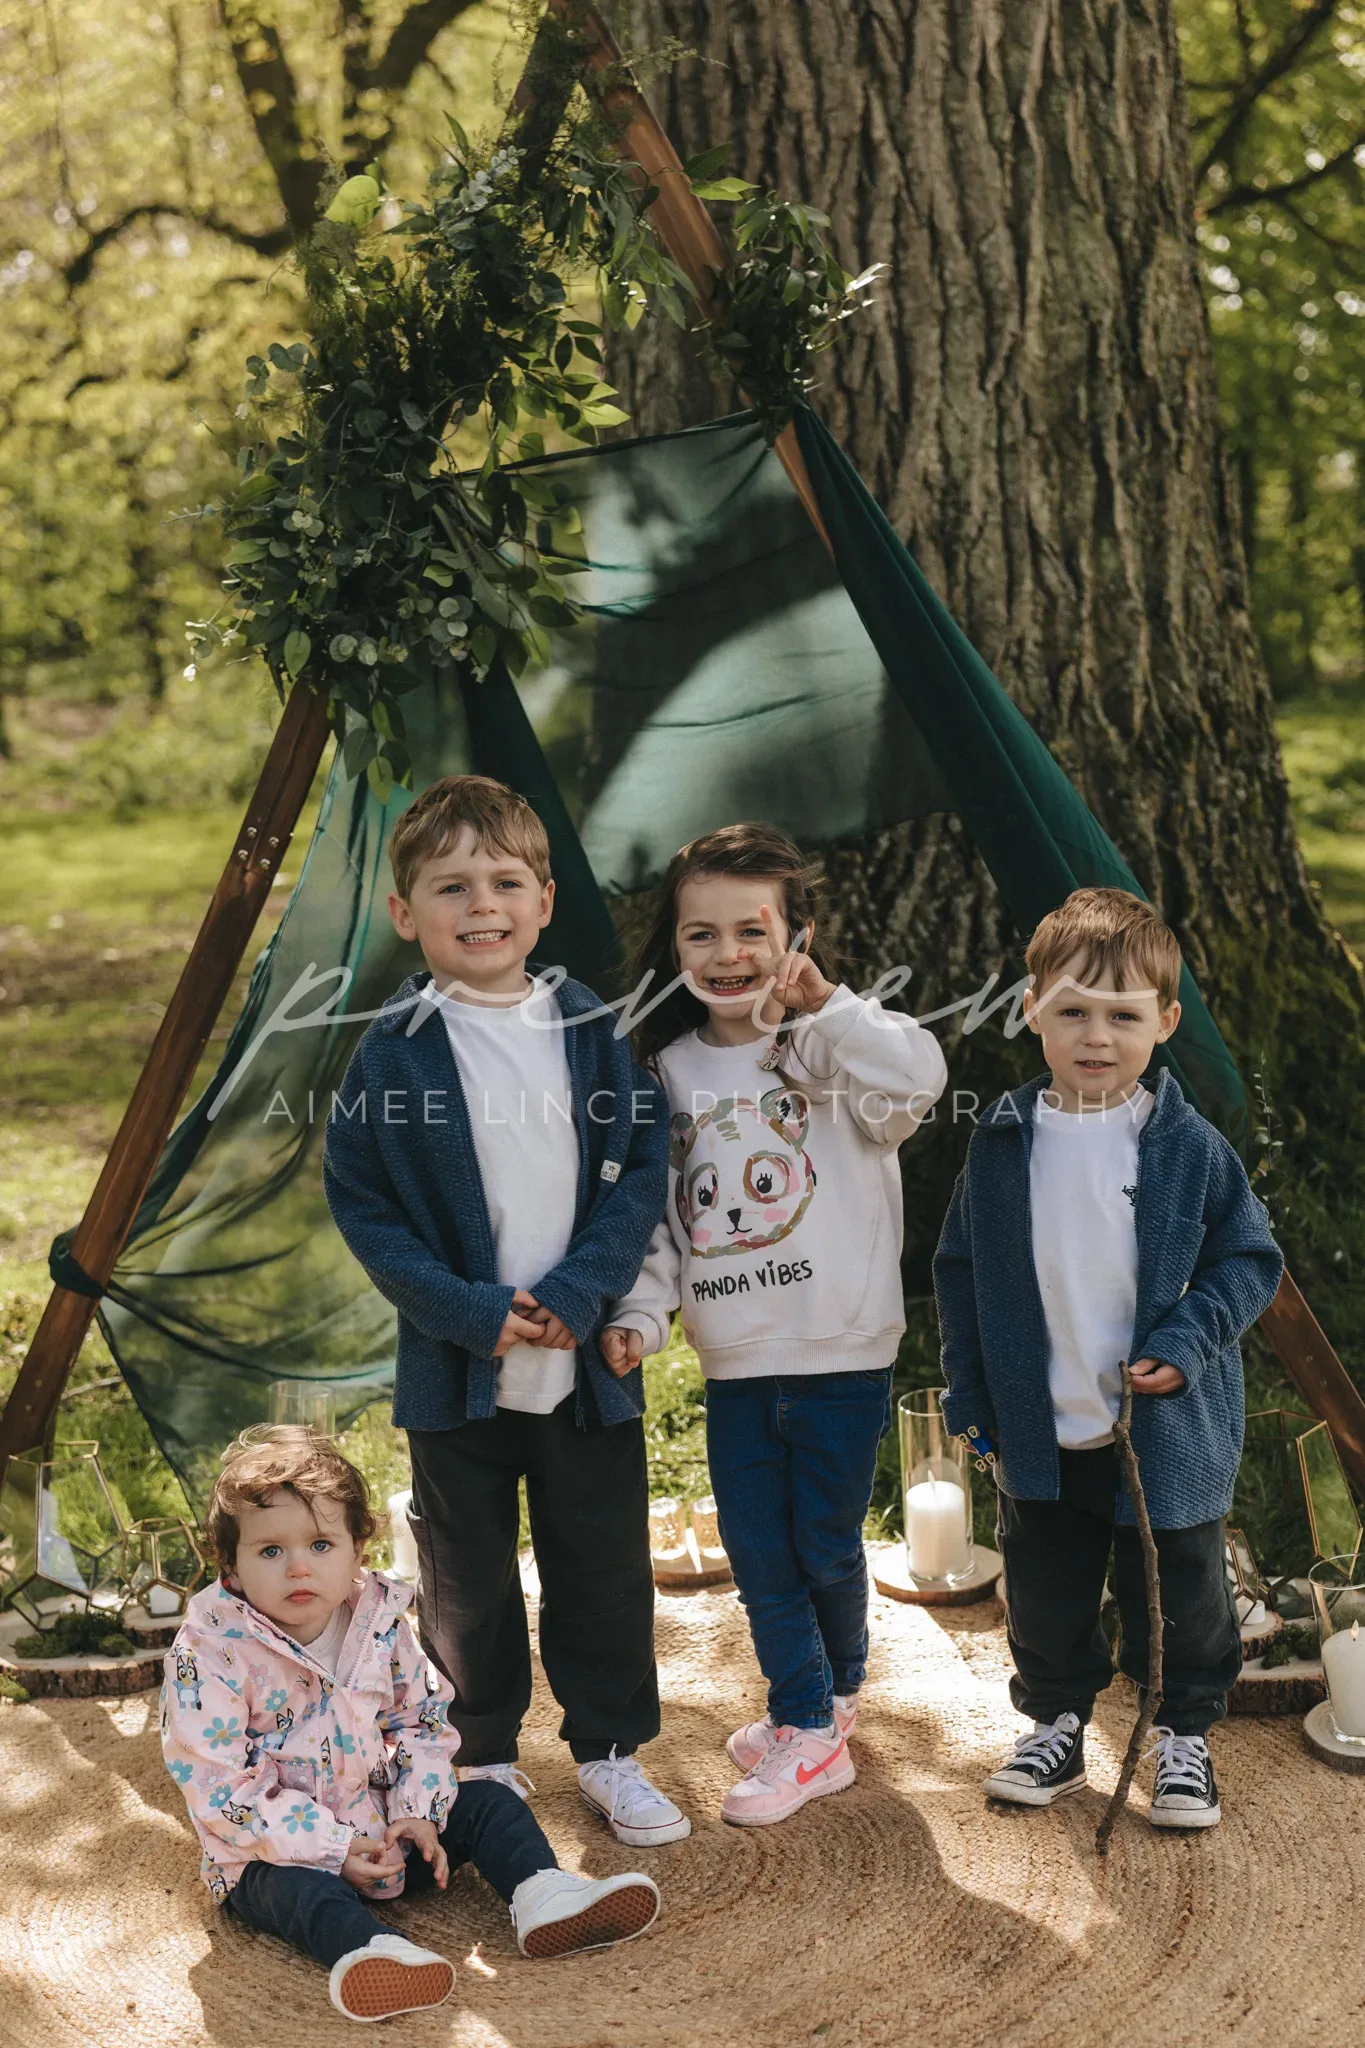 Four young children pose in front of a fabric teepee in a lush park. two boys, one making a peace sign, and a girl stand smiling, while a toddler girl sits in front. the teepee is decorated with greenery.